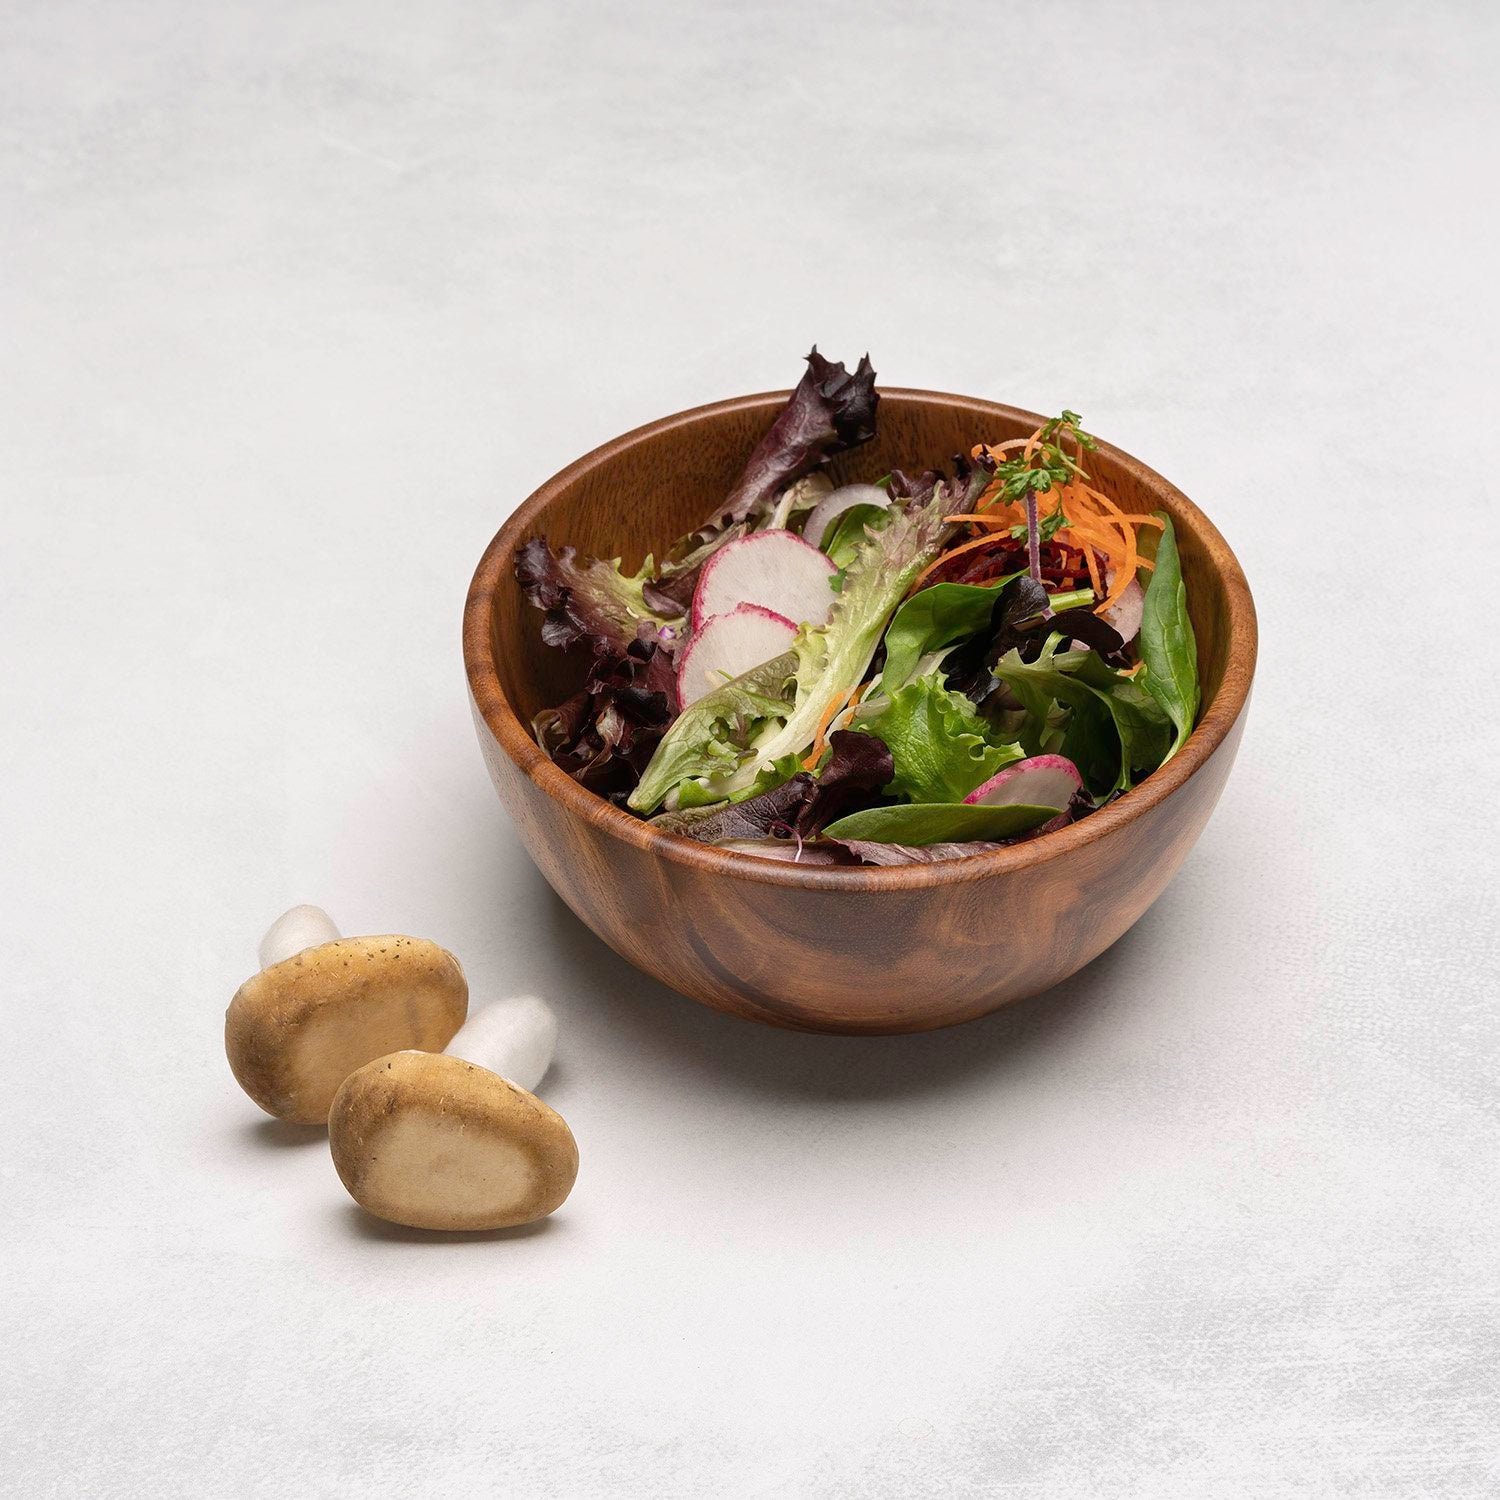 Salad in a wooden bowl